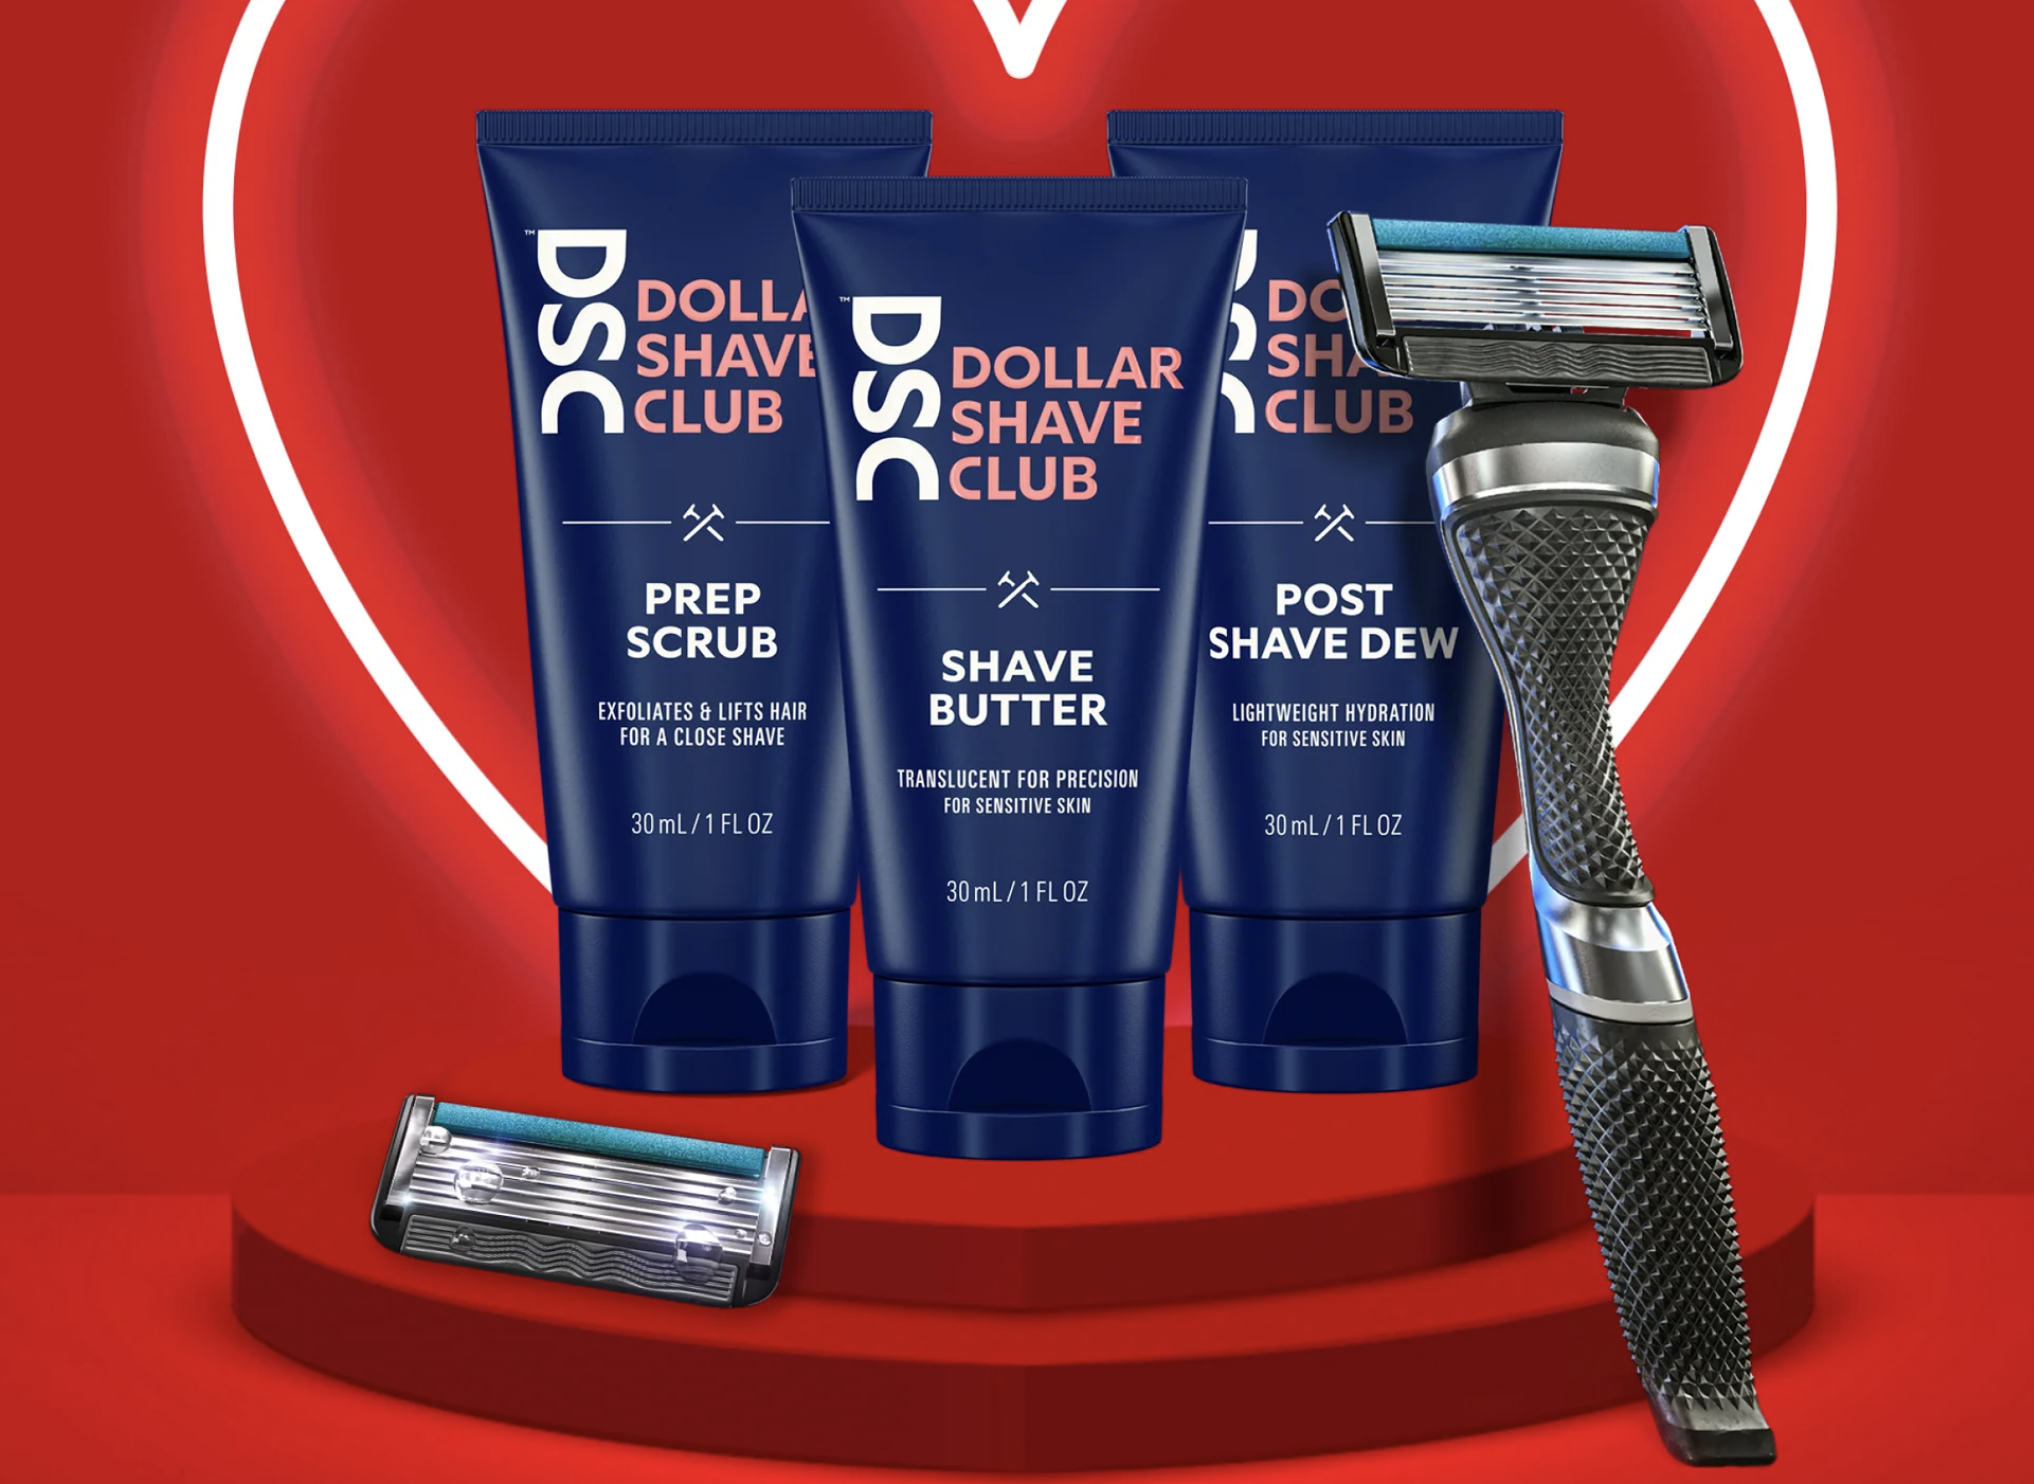 A promotional poster for Dollar Shave Club.